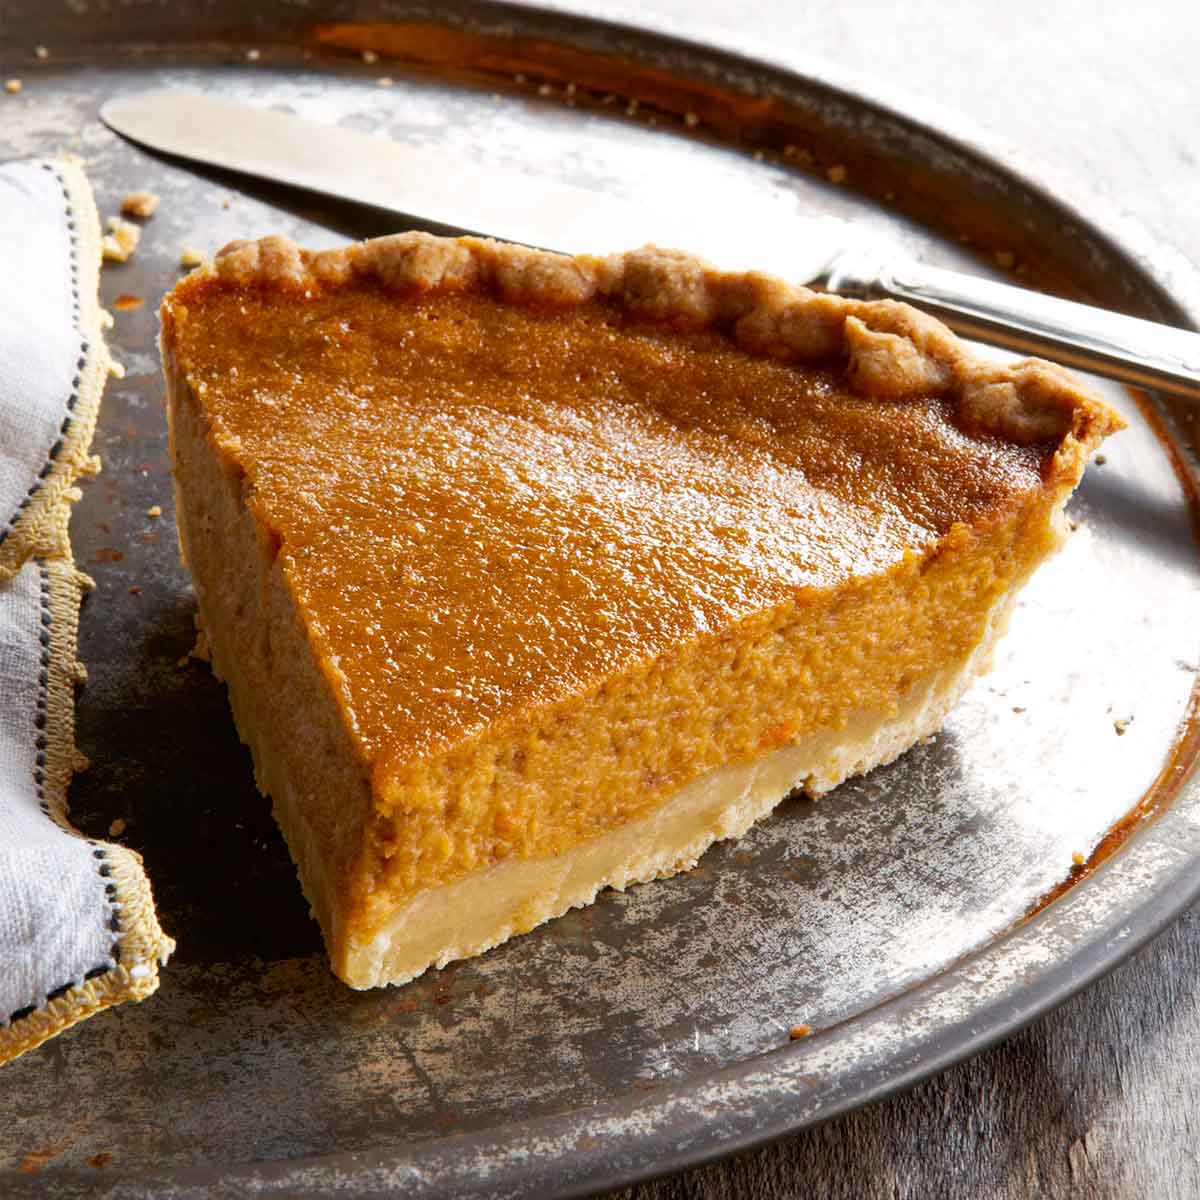 A slice of sweet potato pie on a large metal plate with a napkin and a knife.